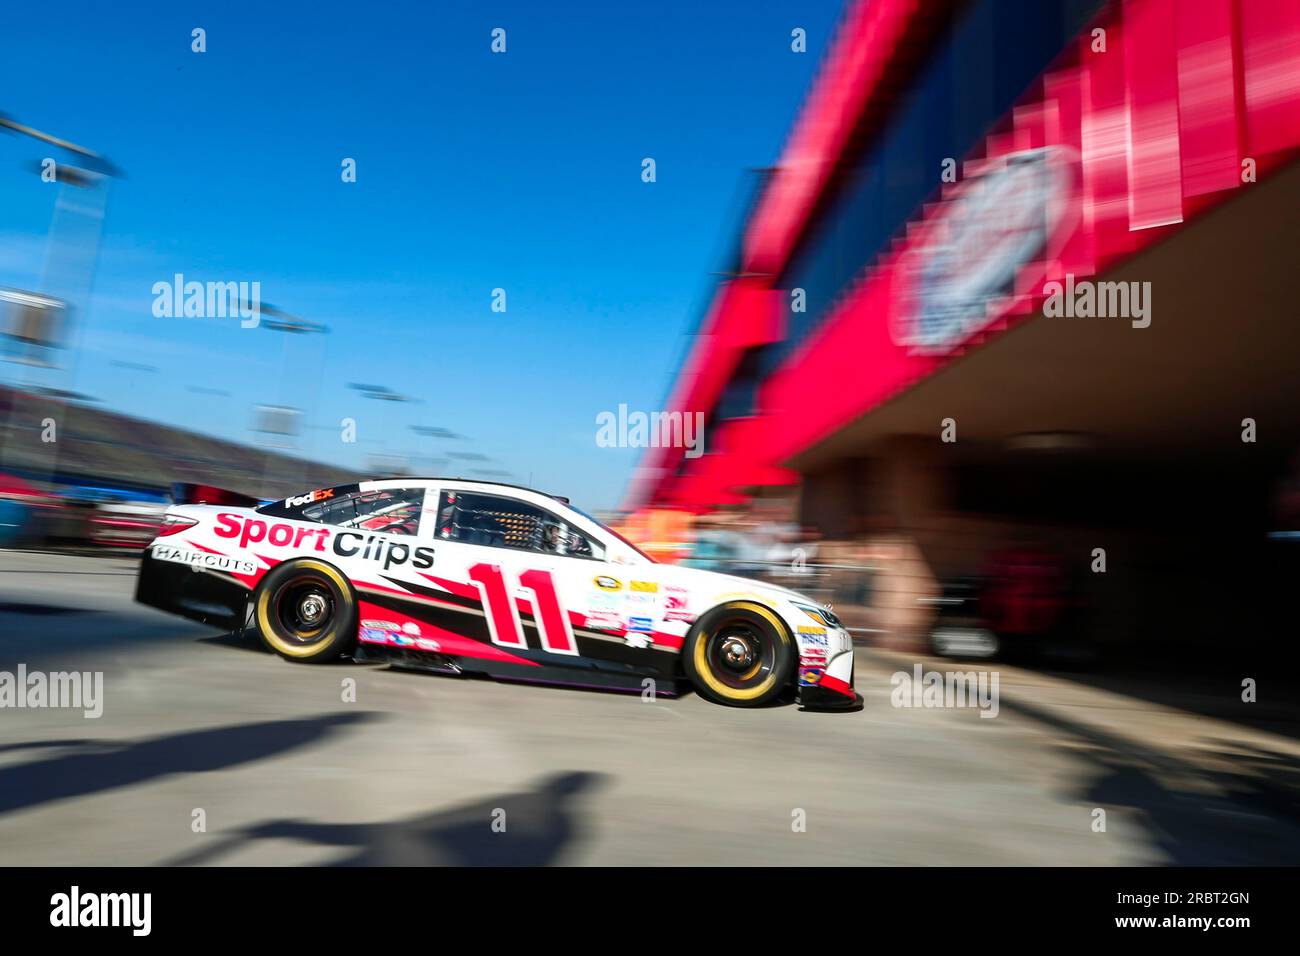 Fontana, CA, Mar 21, 2015: Denny Hamlin (11) takes to the track to practice for the Auto Club 400 at Auto Club Speedway in Fontana, CA Stock Photo